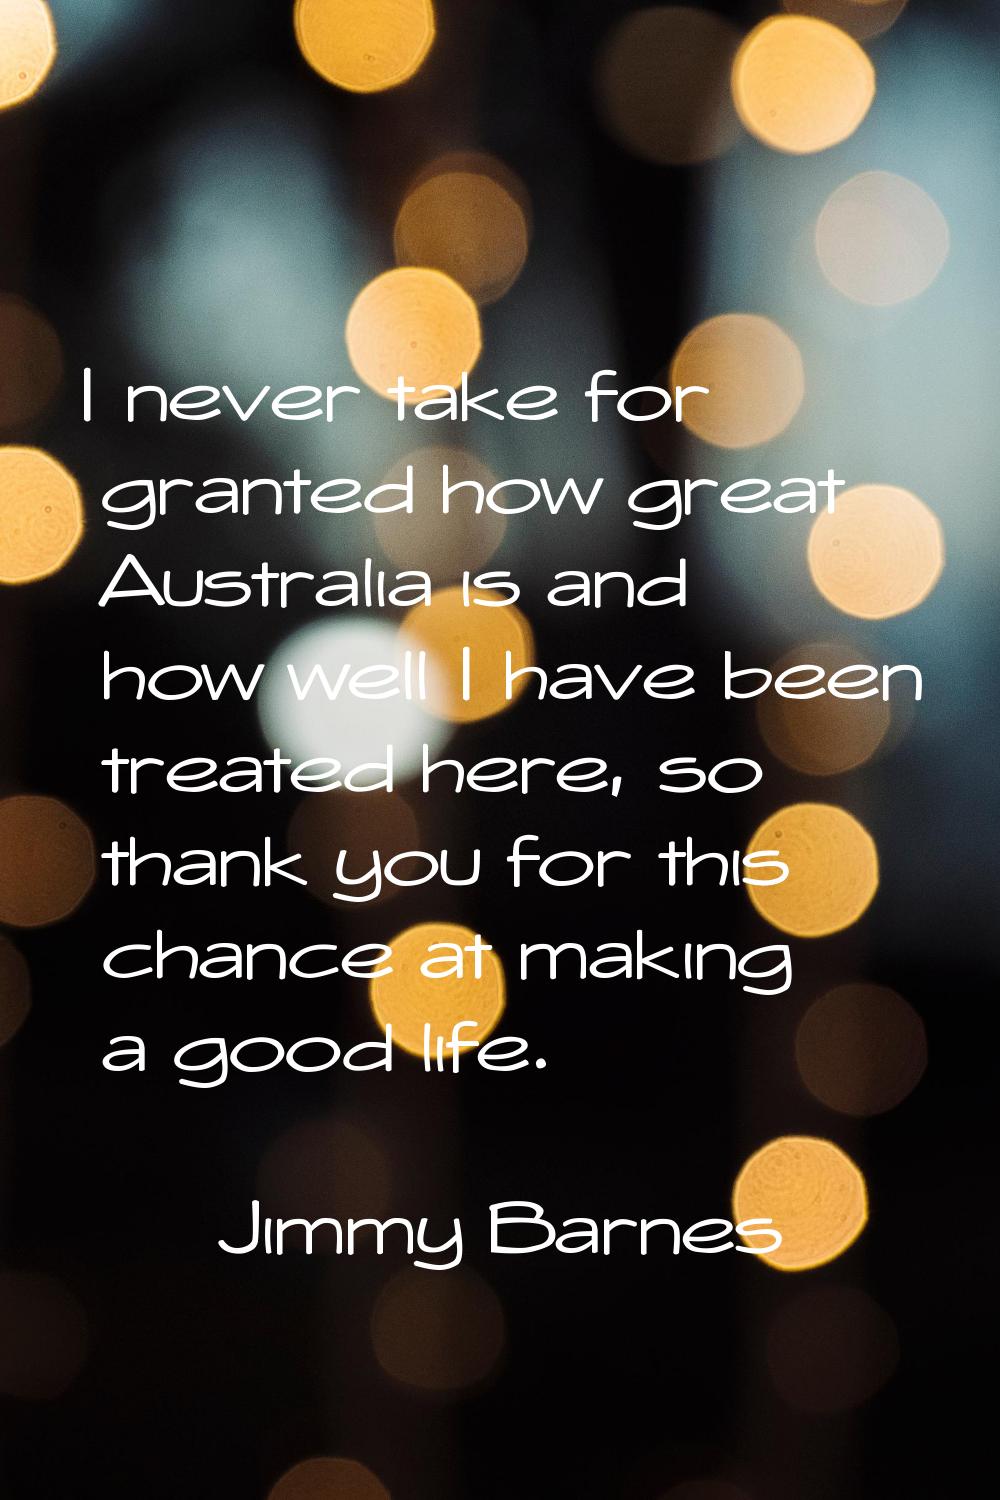 I never take for granted how great Australia is and how well I have been treated here, so thank you